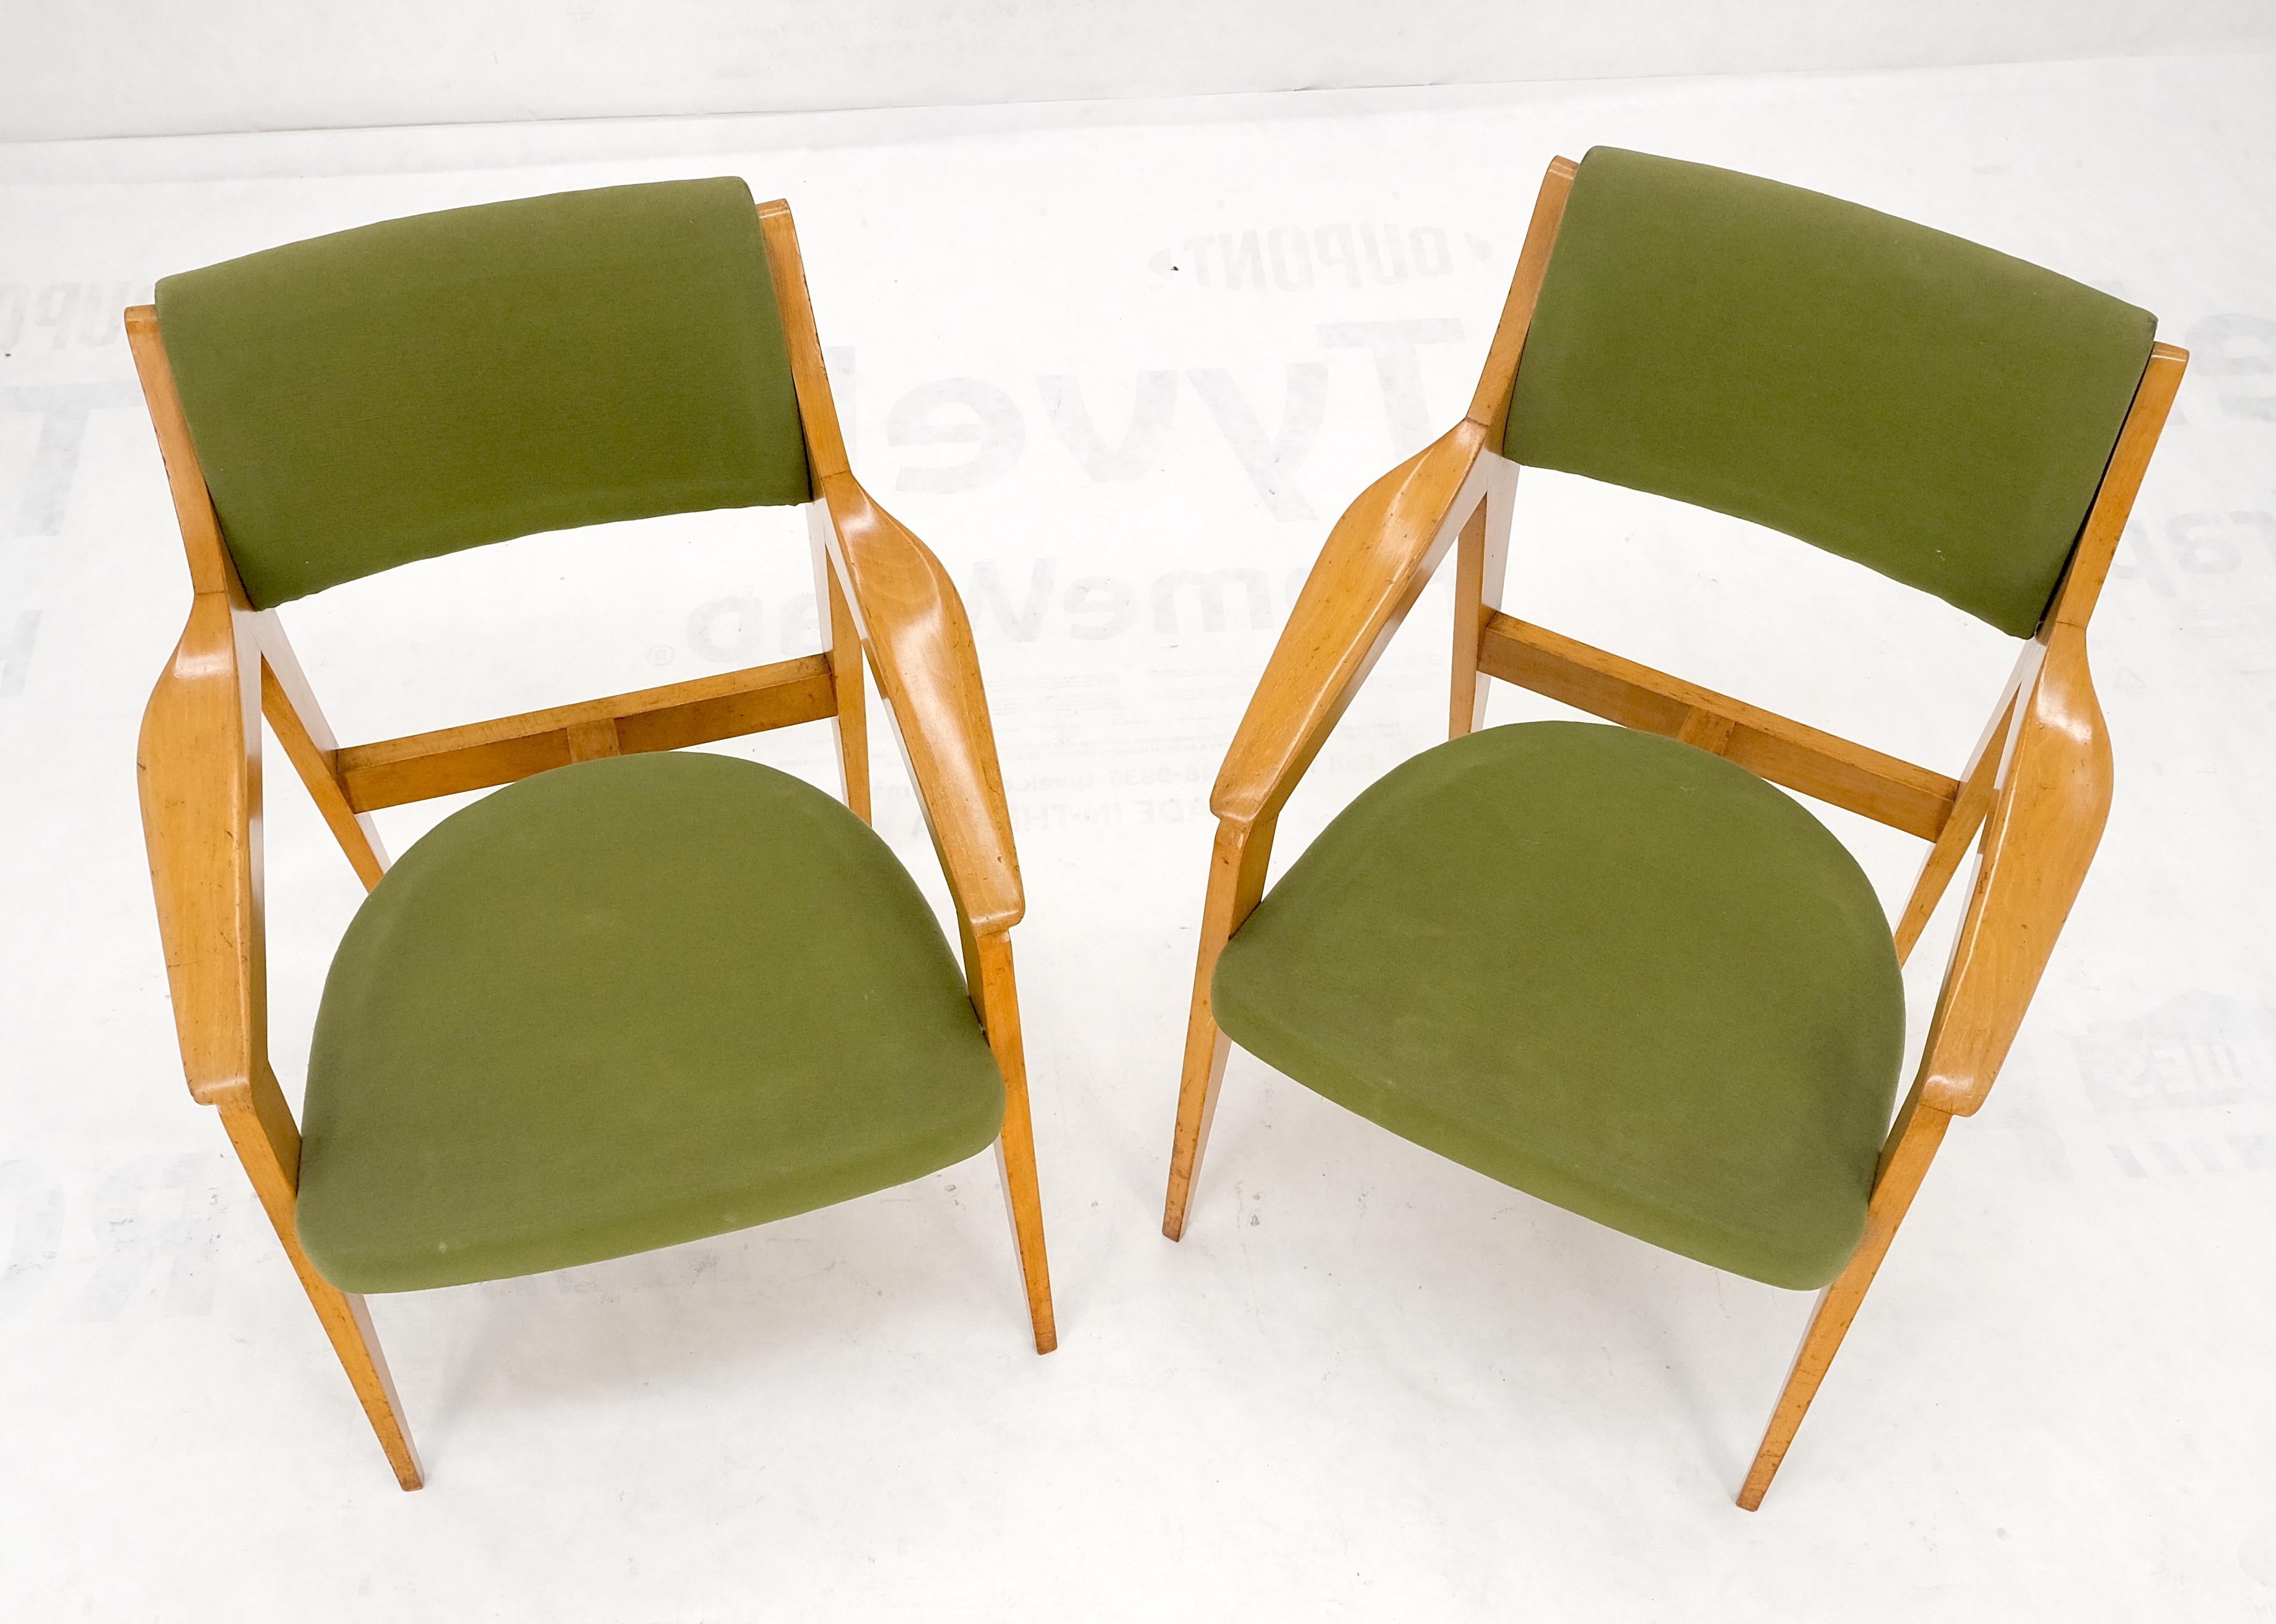 Pair of c1950s Blond Birch Scandinavian Swedish Arm Chairs Green Upholstery For Sale 2